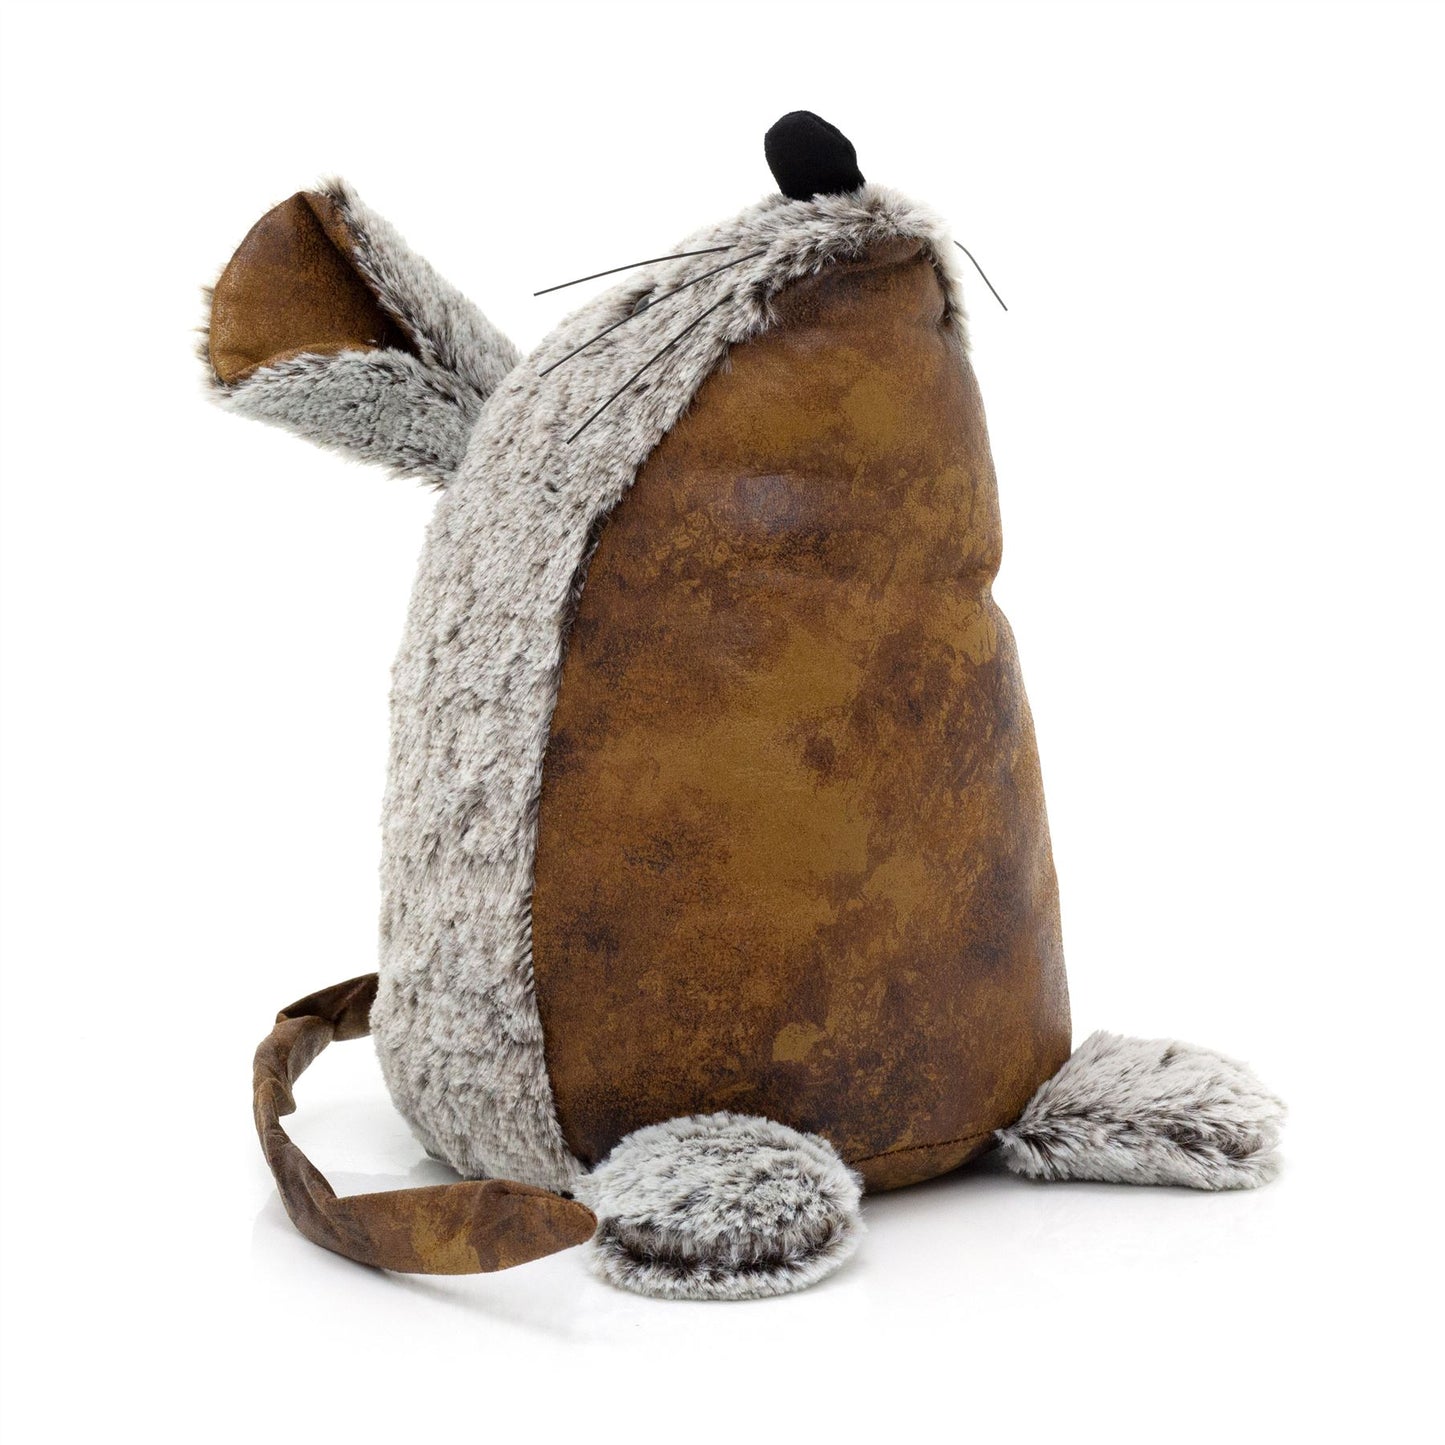 Benny Mouse Doorstop | Faux Leather Weighted Mouse Shaped Animal Door Stop 1.8kg